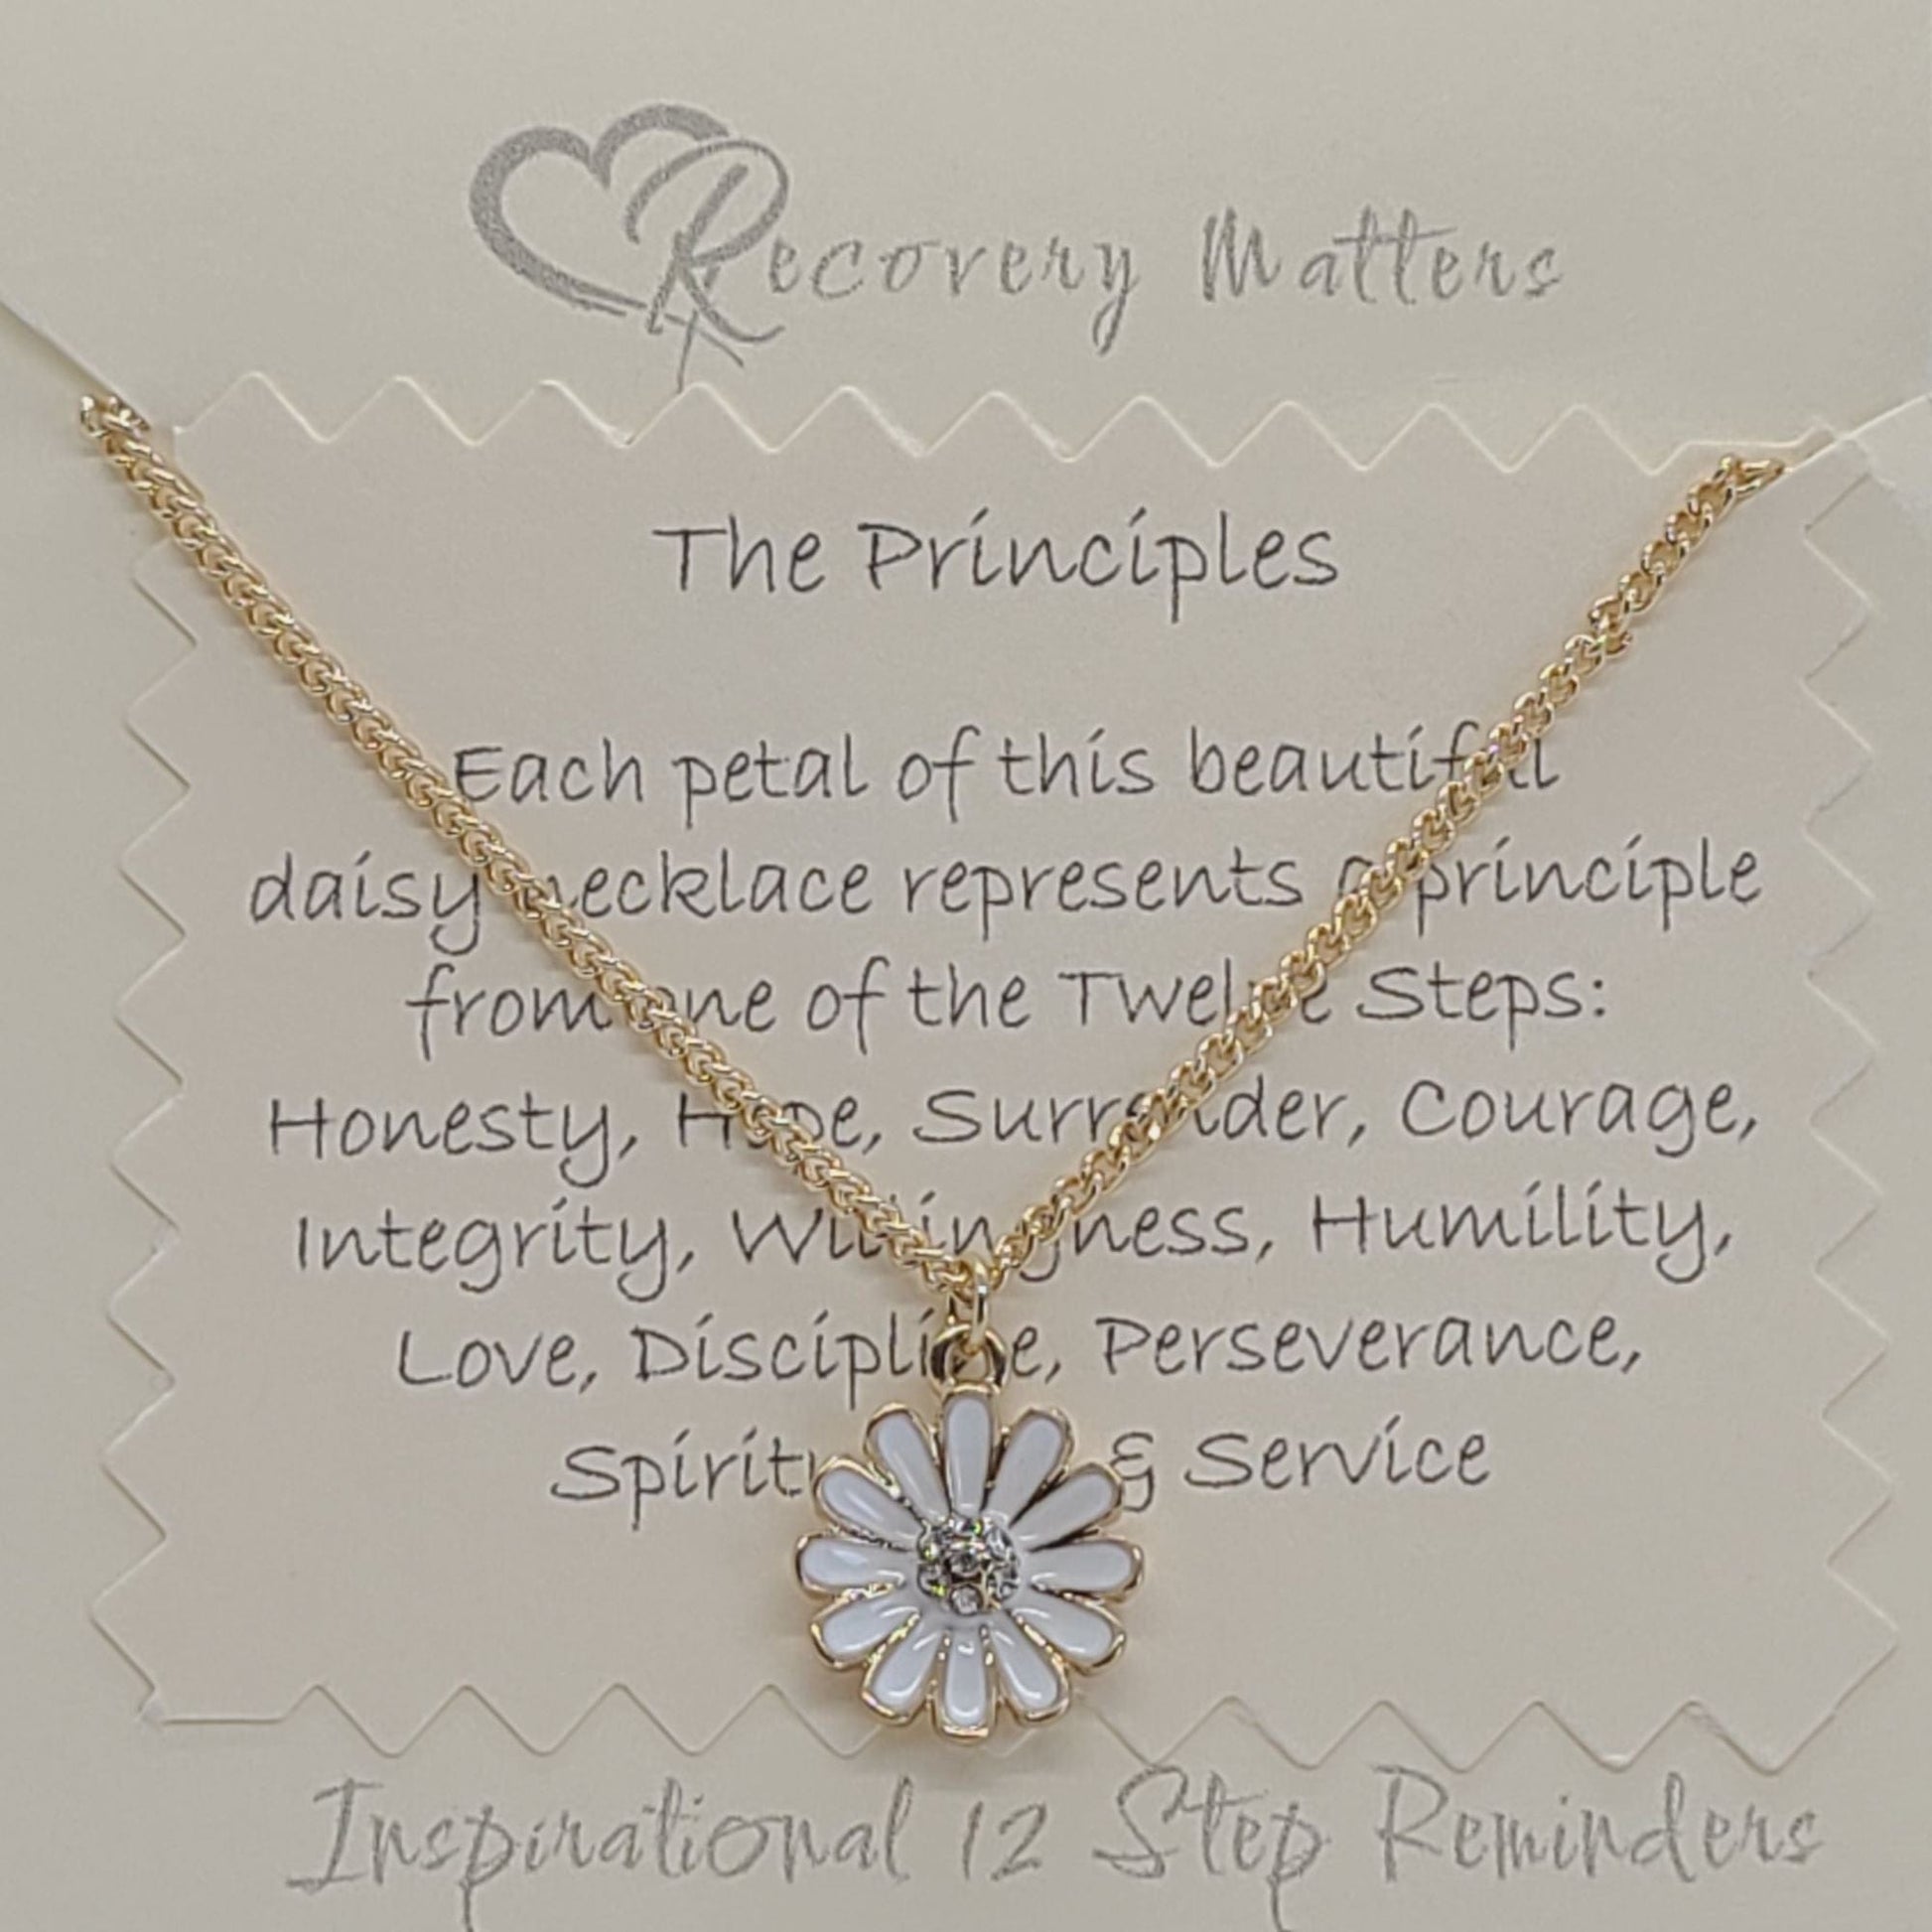 The Principles Necklace by Recovery Matters